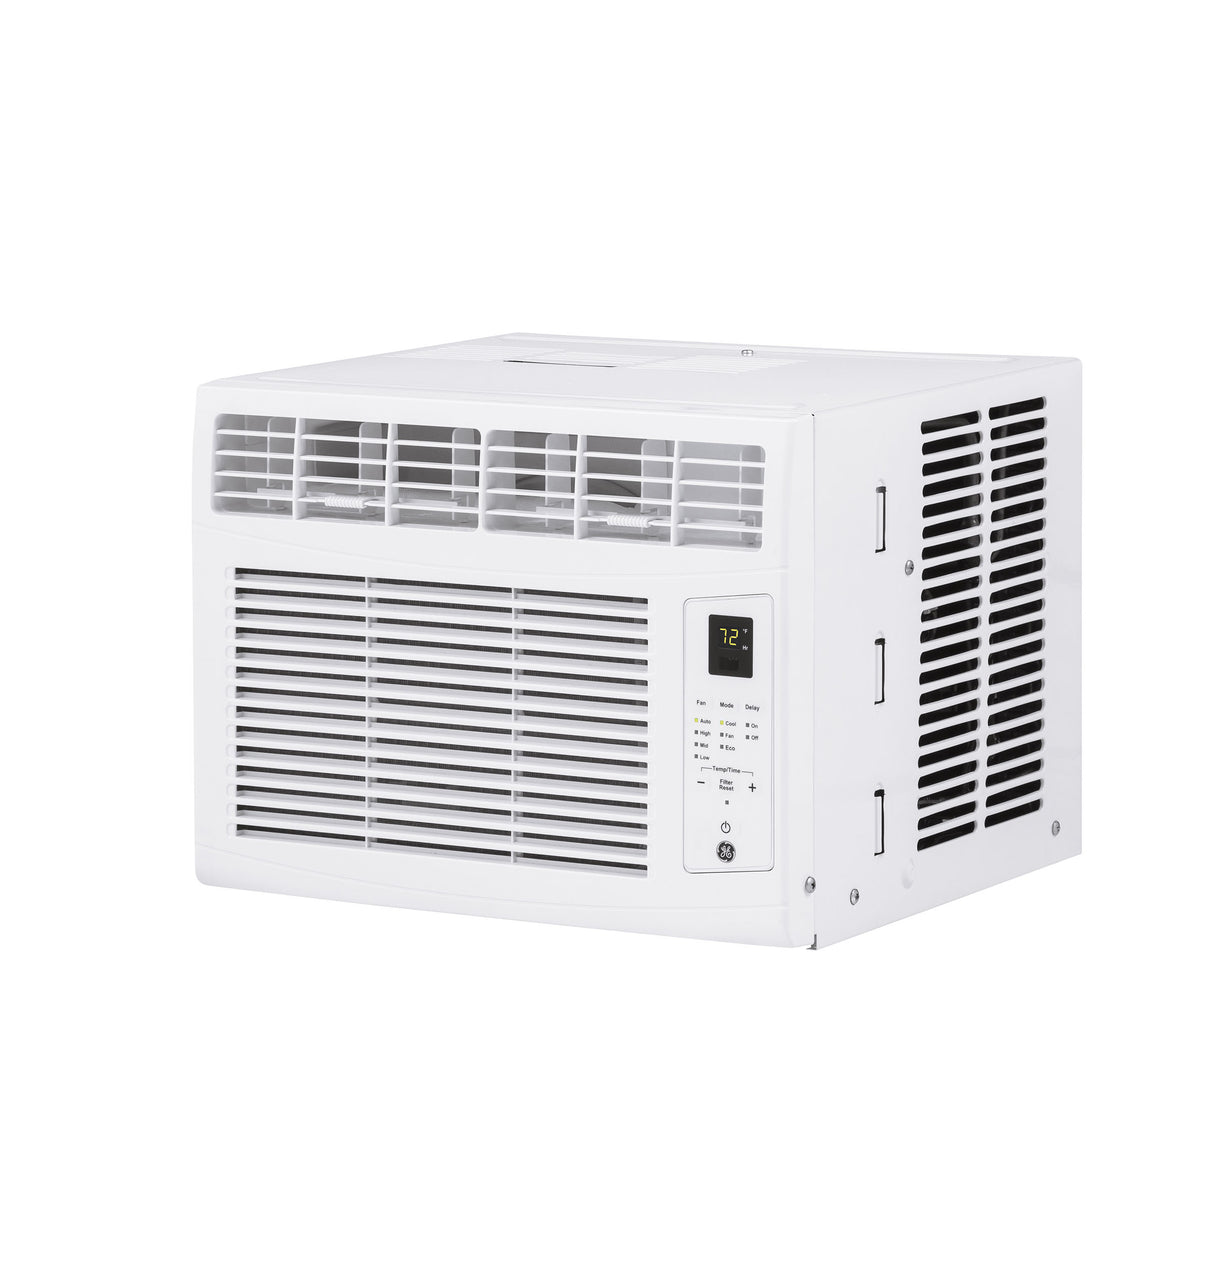 GE(R) 6,000 BTU Electronic Window Air Conditioner for Small Rooms up to 250 sq ft. - (AHQ06LZ)